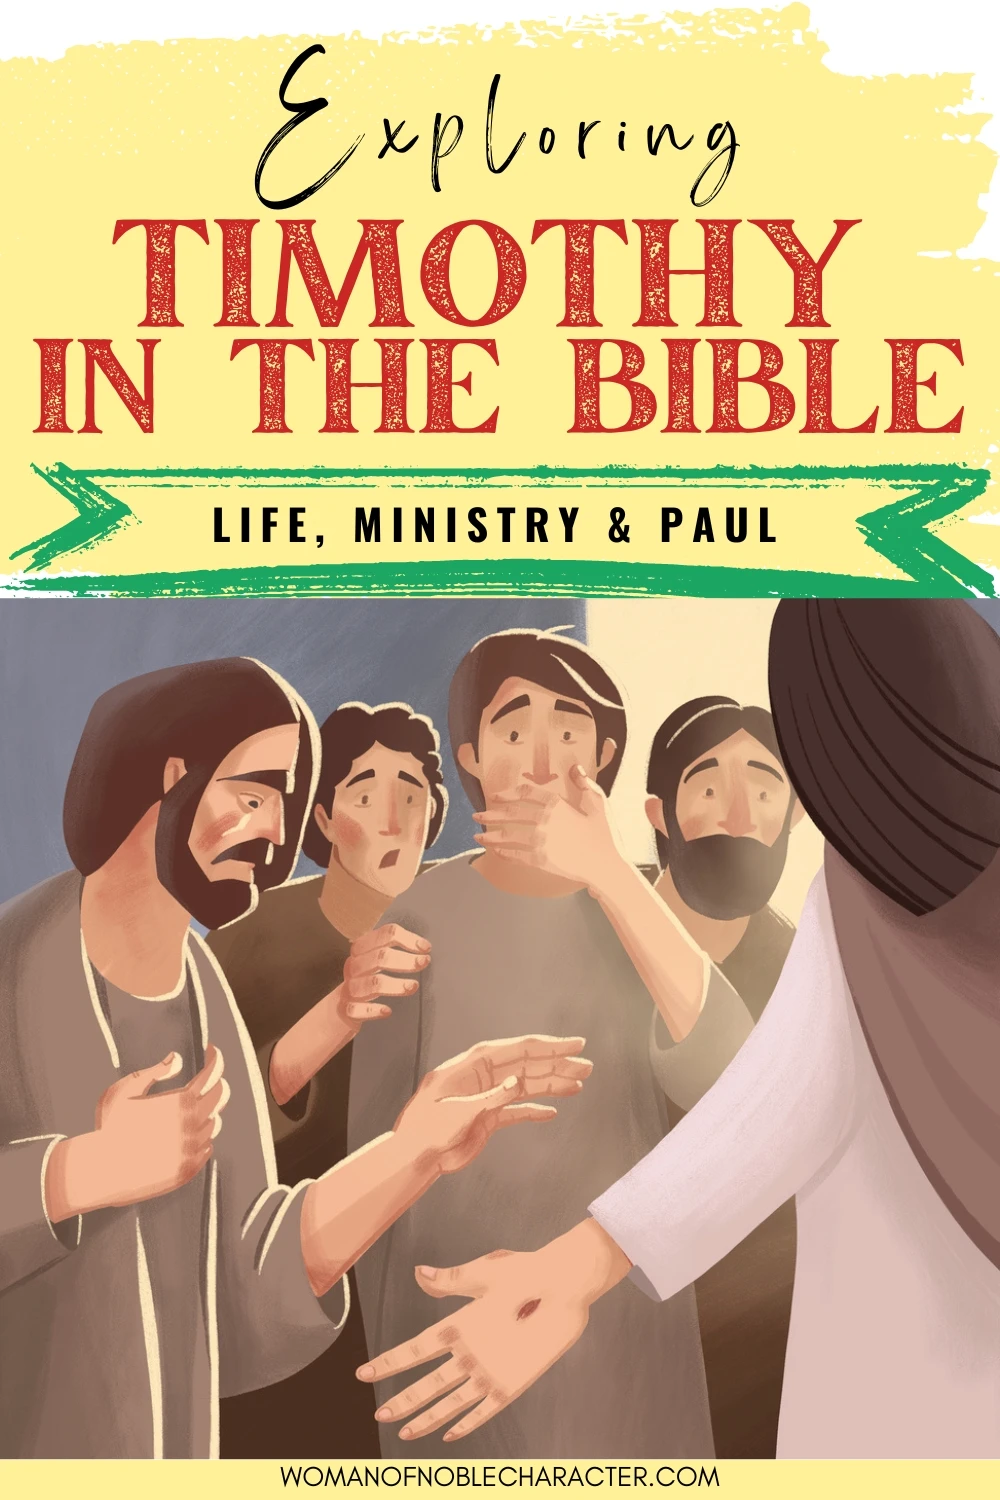 cartoon image of disciples of Christ for the post on Timothy in the Bible